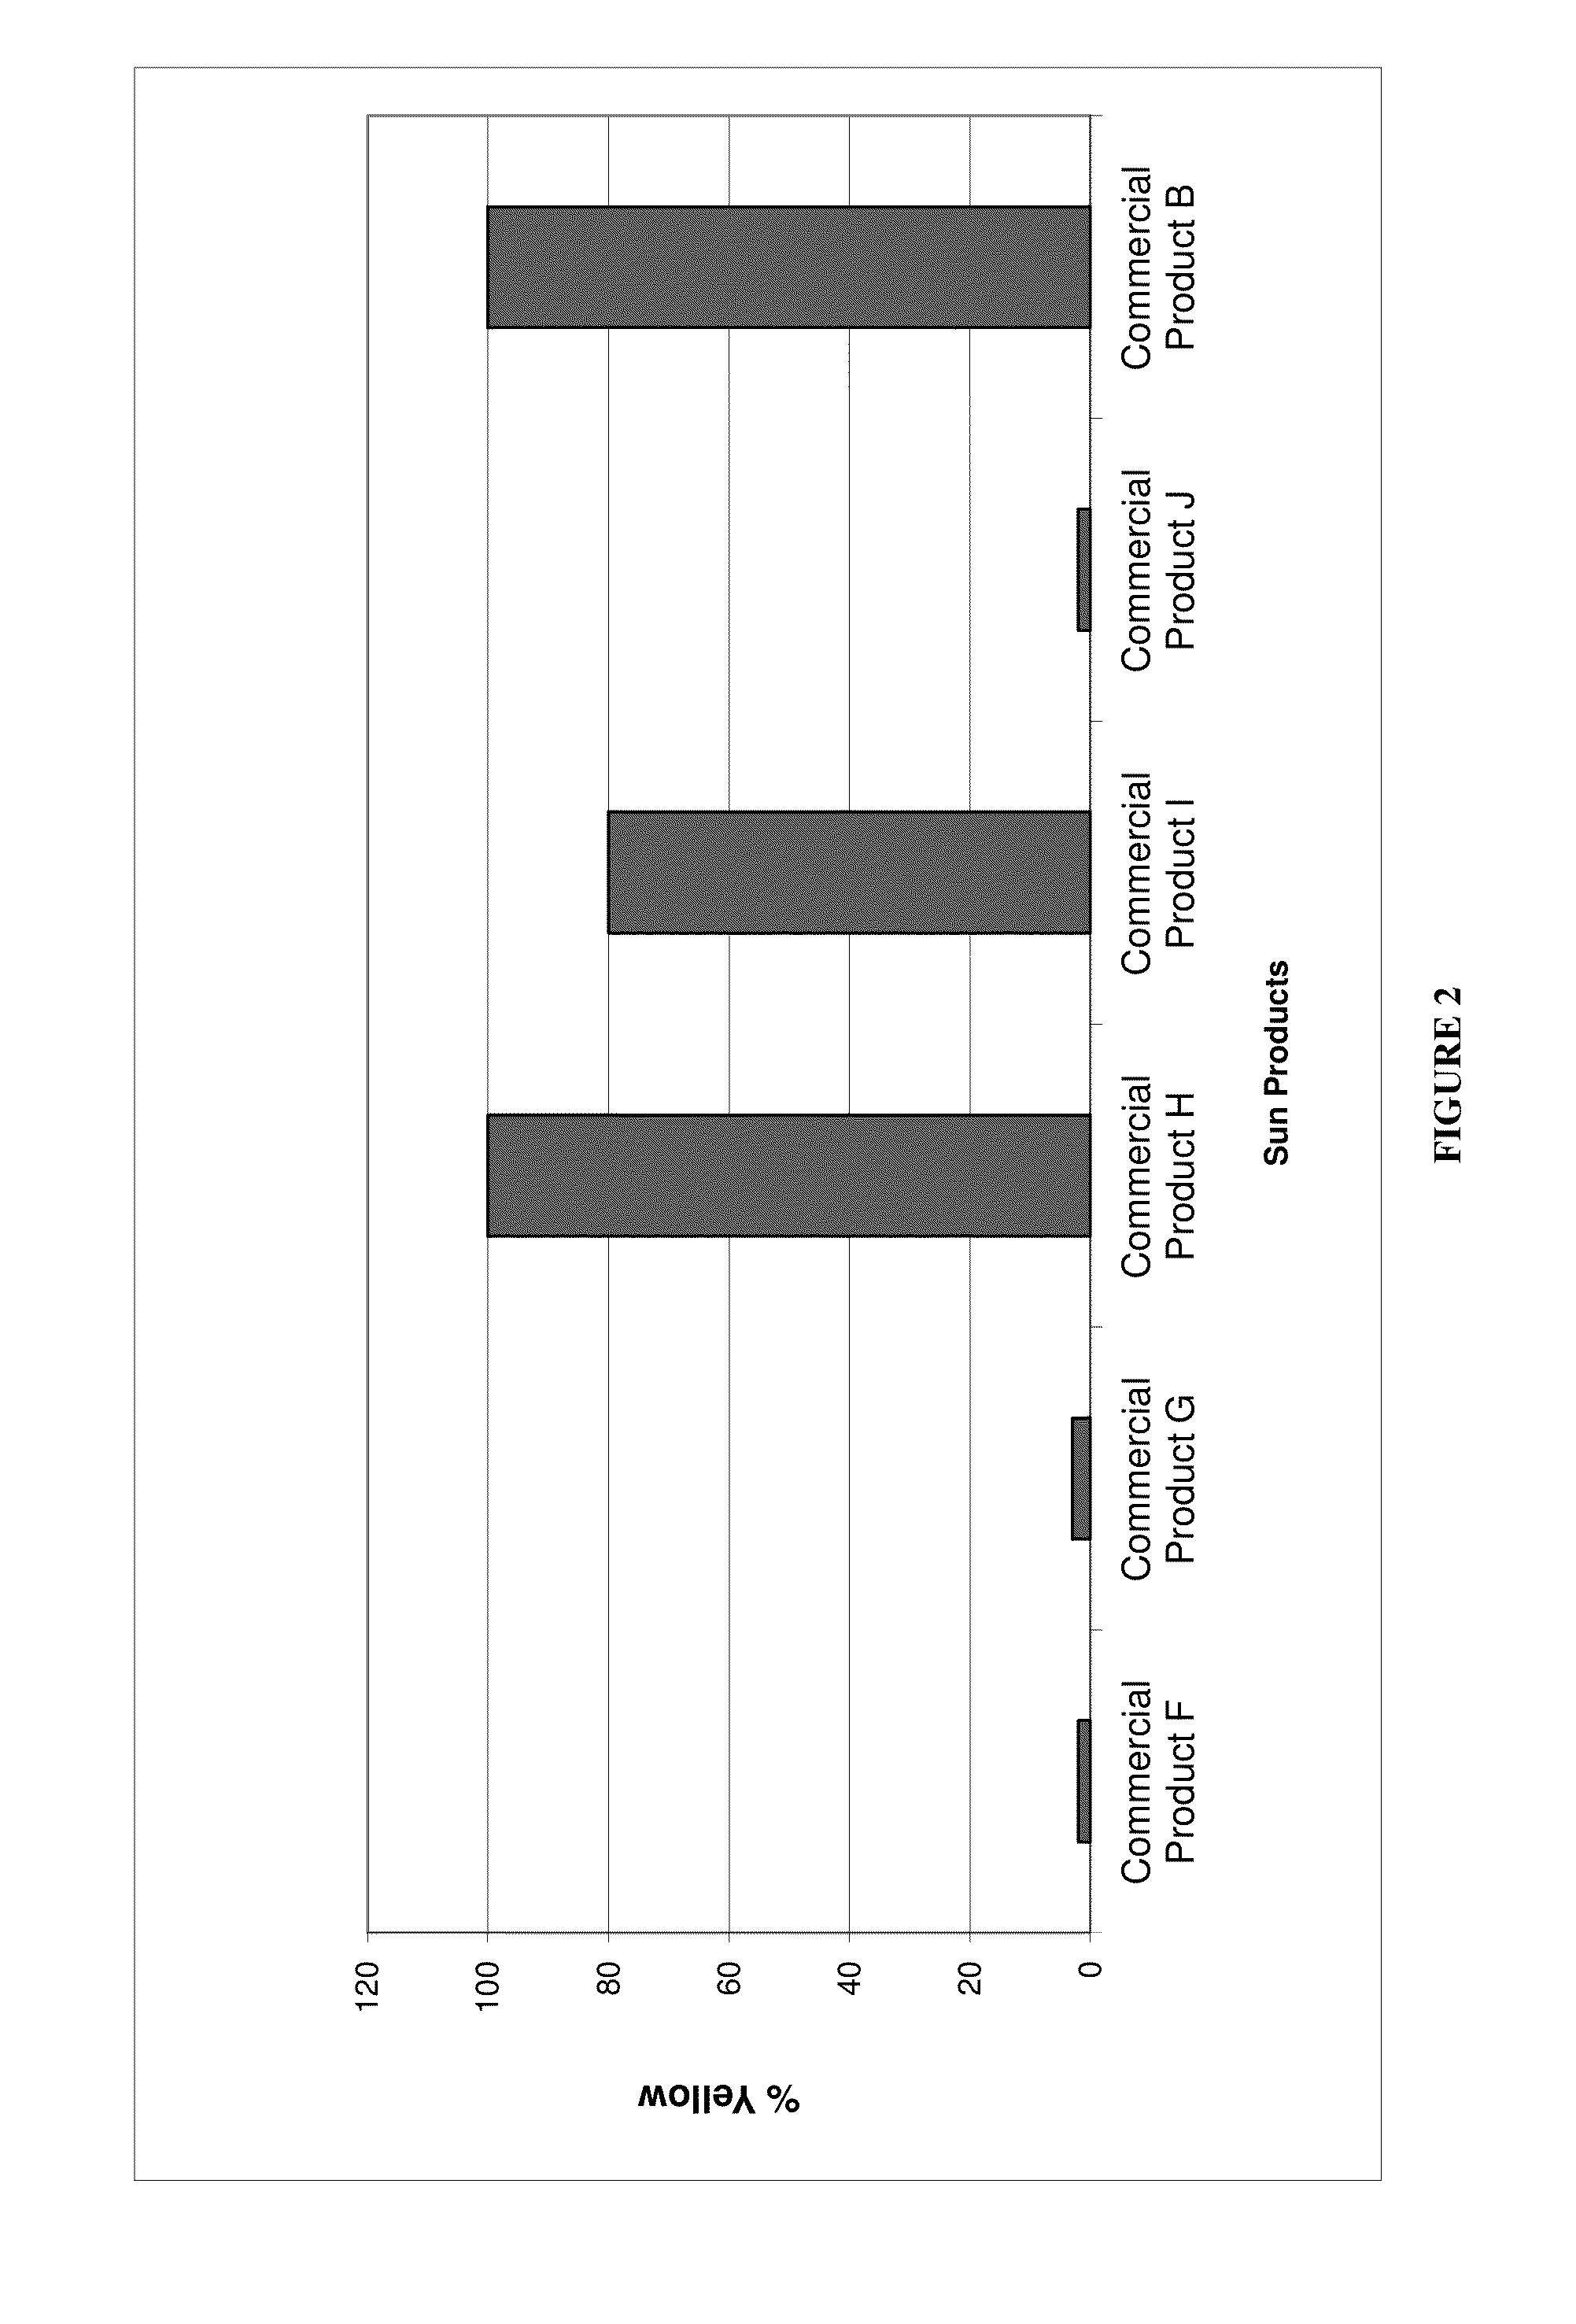 Cleaning composition and method for removal of sunscreen stains